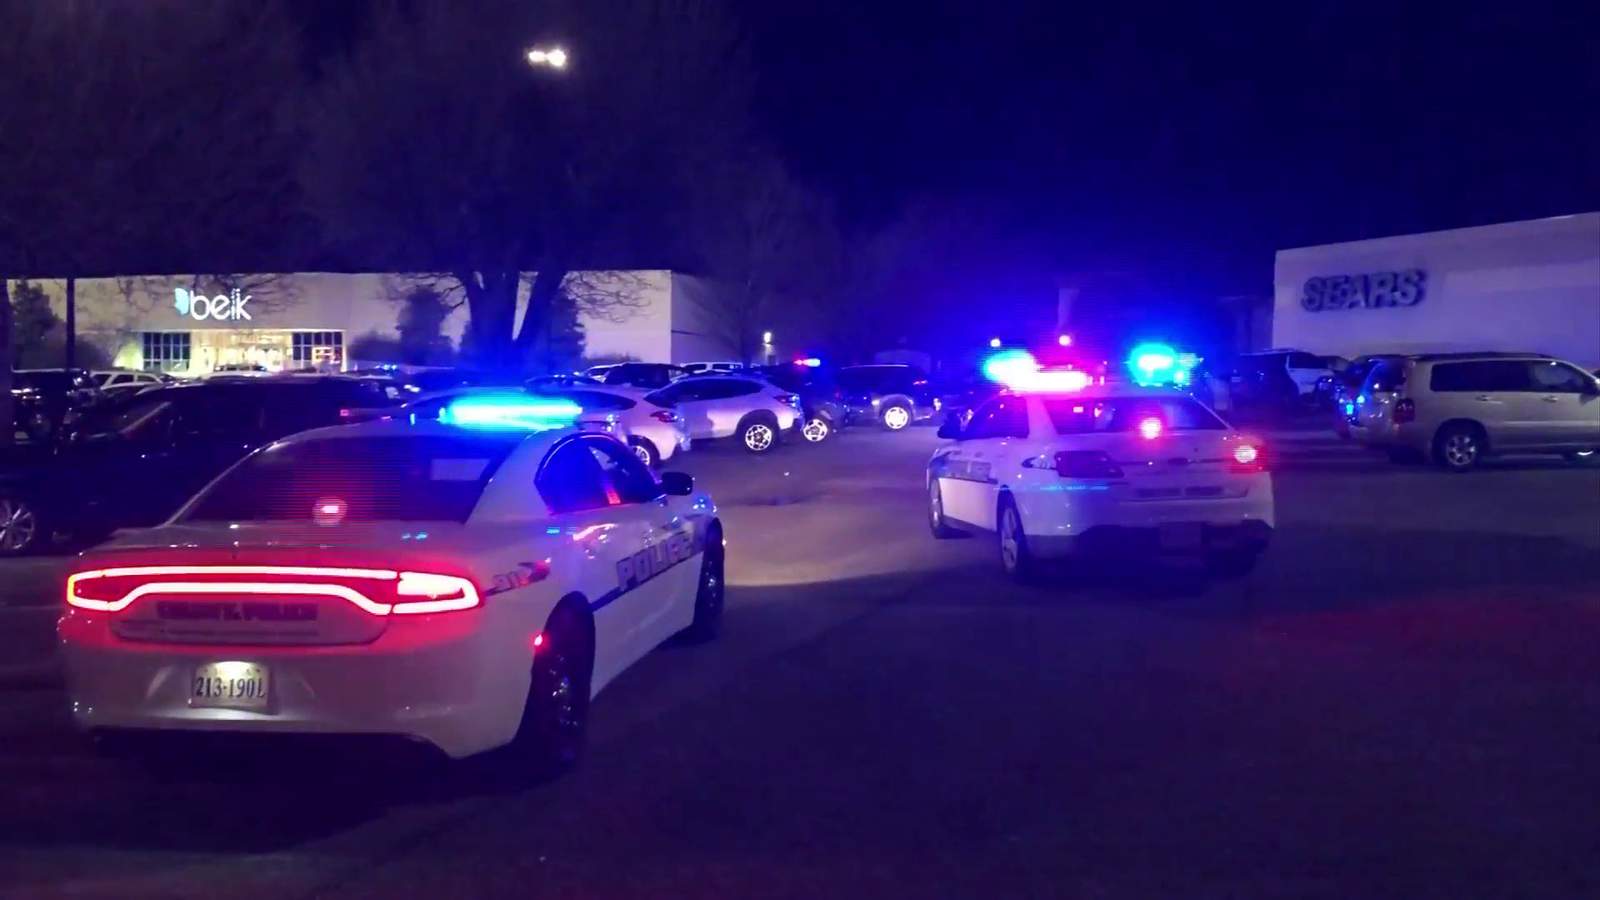 One person admitted to hospital after altercation led to shooting in Valley View Mall